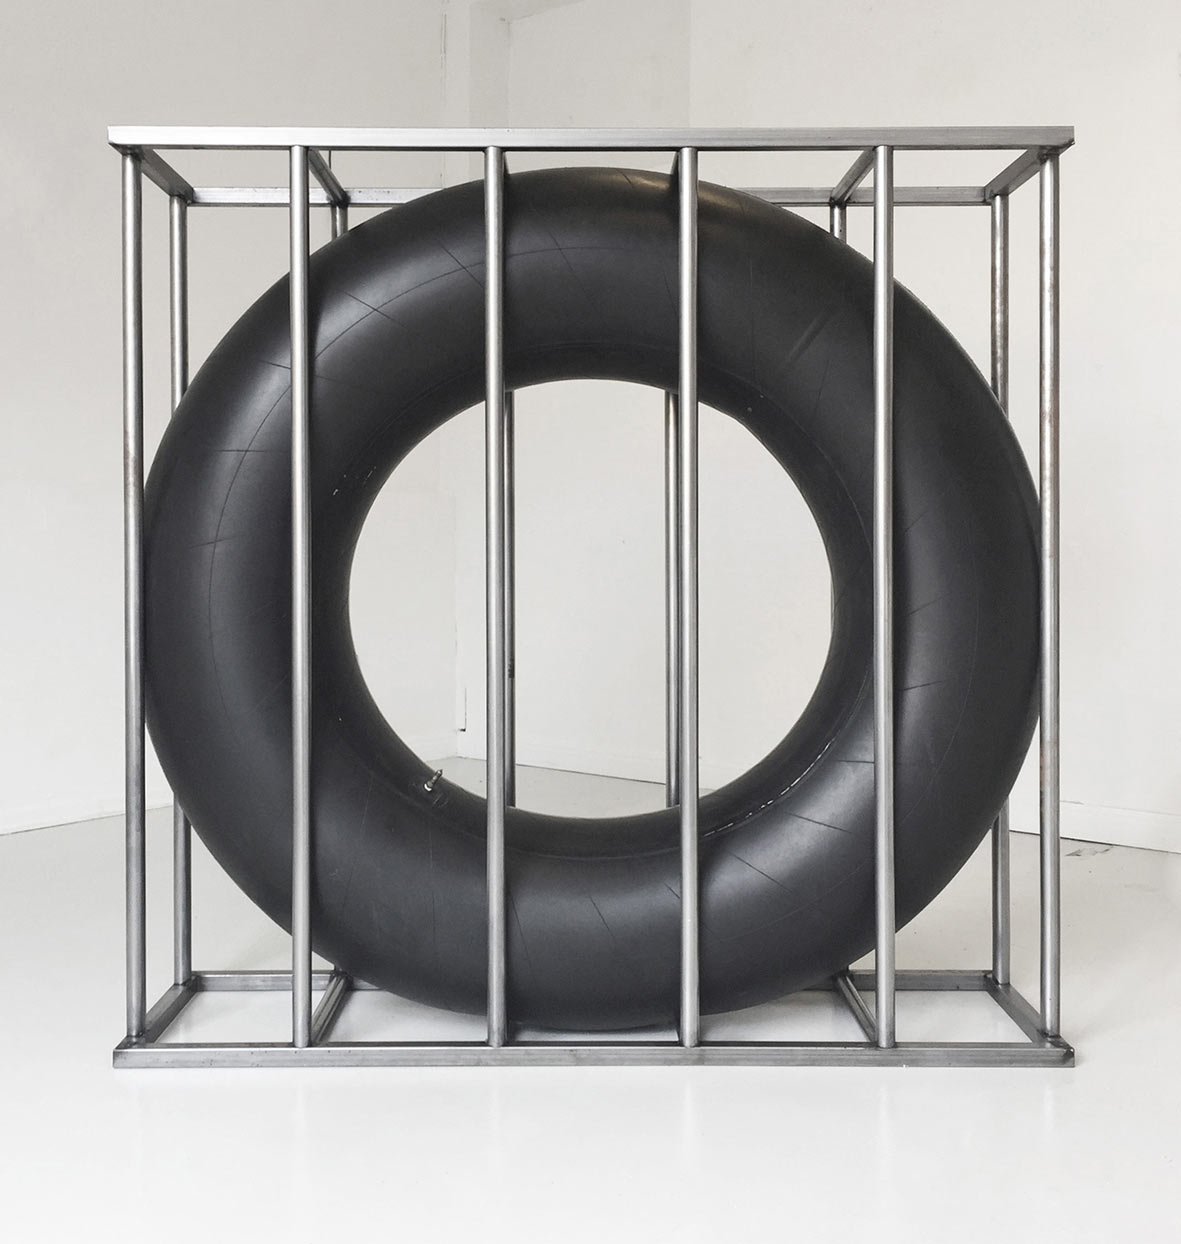 The Door Was Locked But He Forced an Entry (Phase I), 2015, steel, rubber inner-tube, cm. 147 x 147 x 41